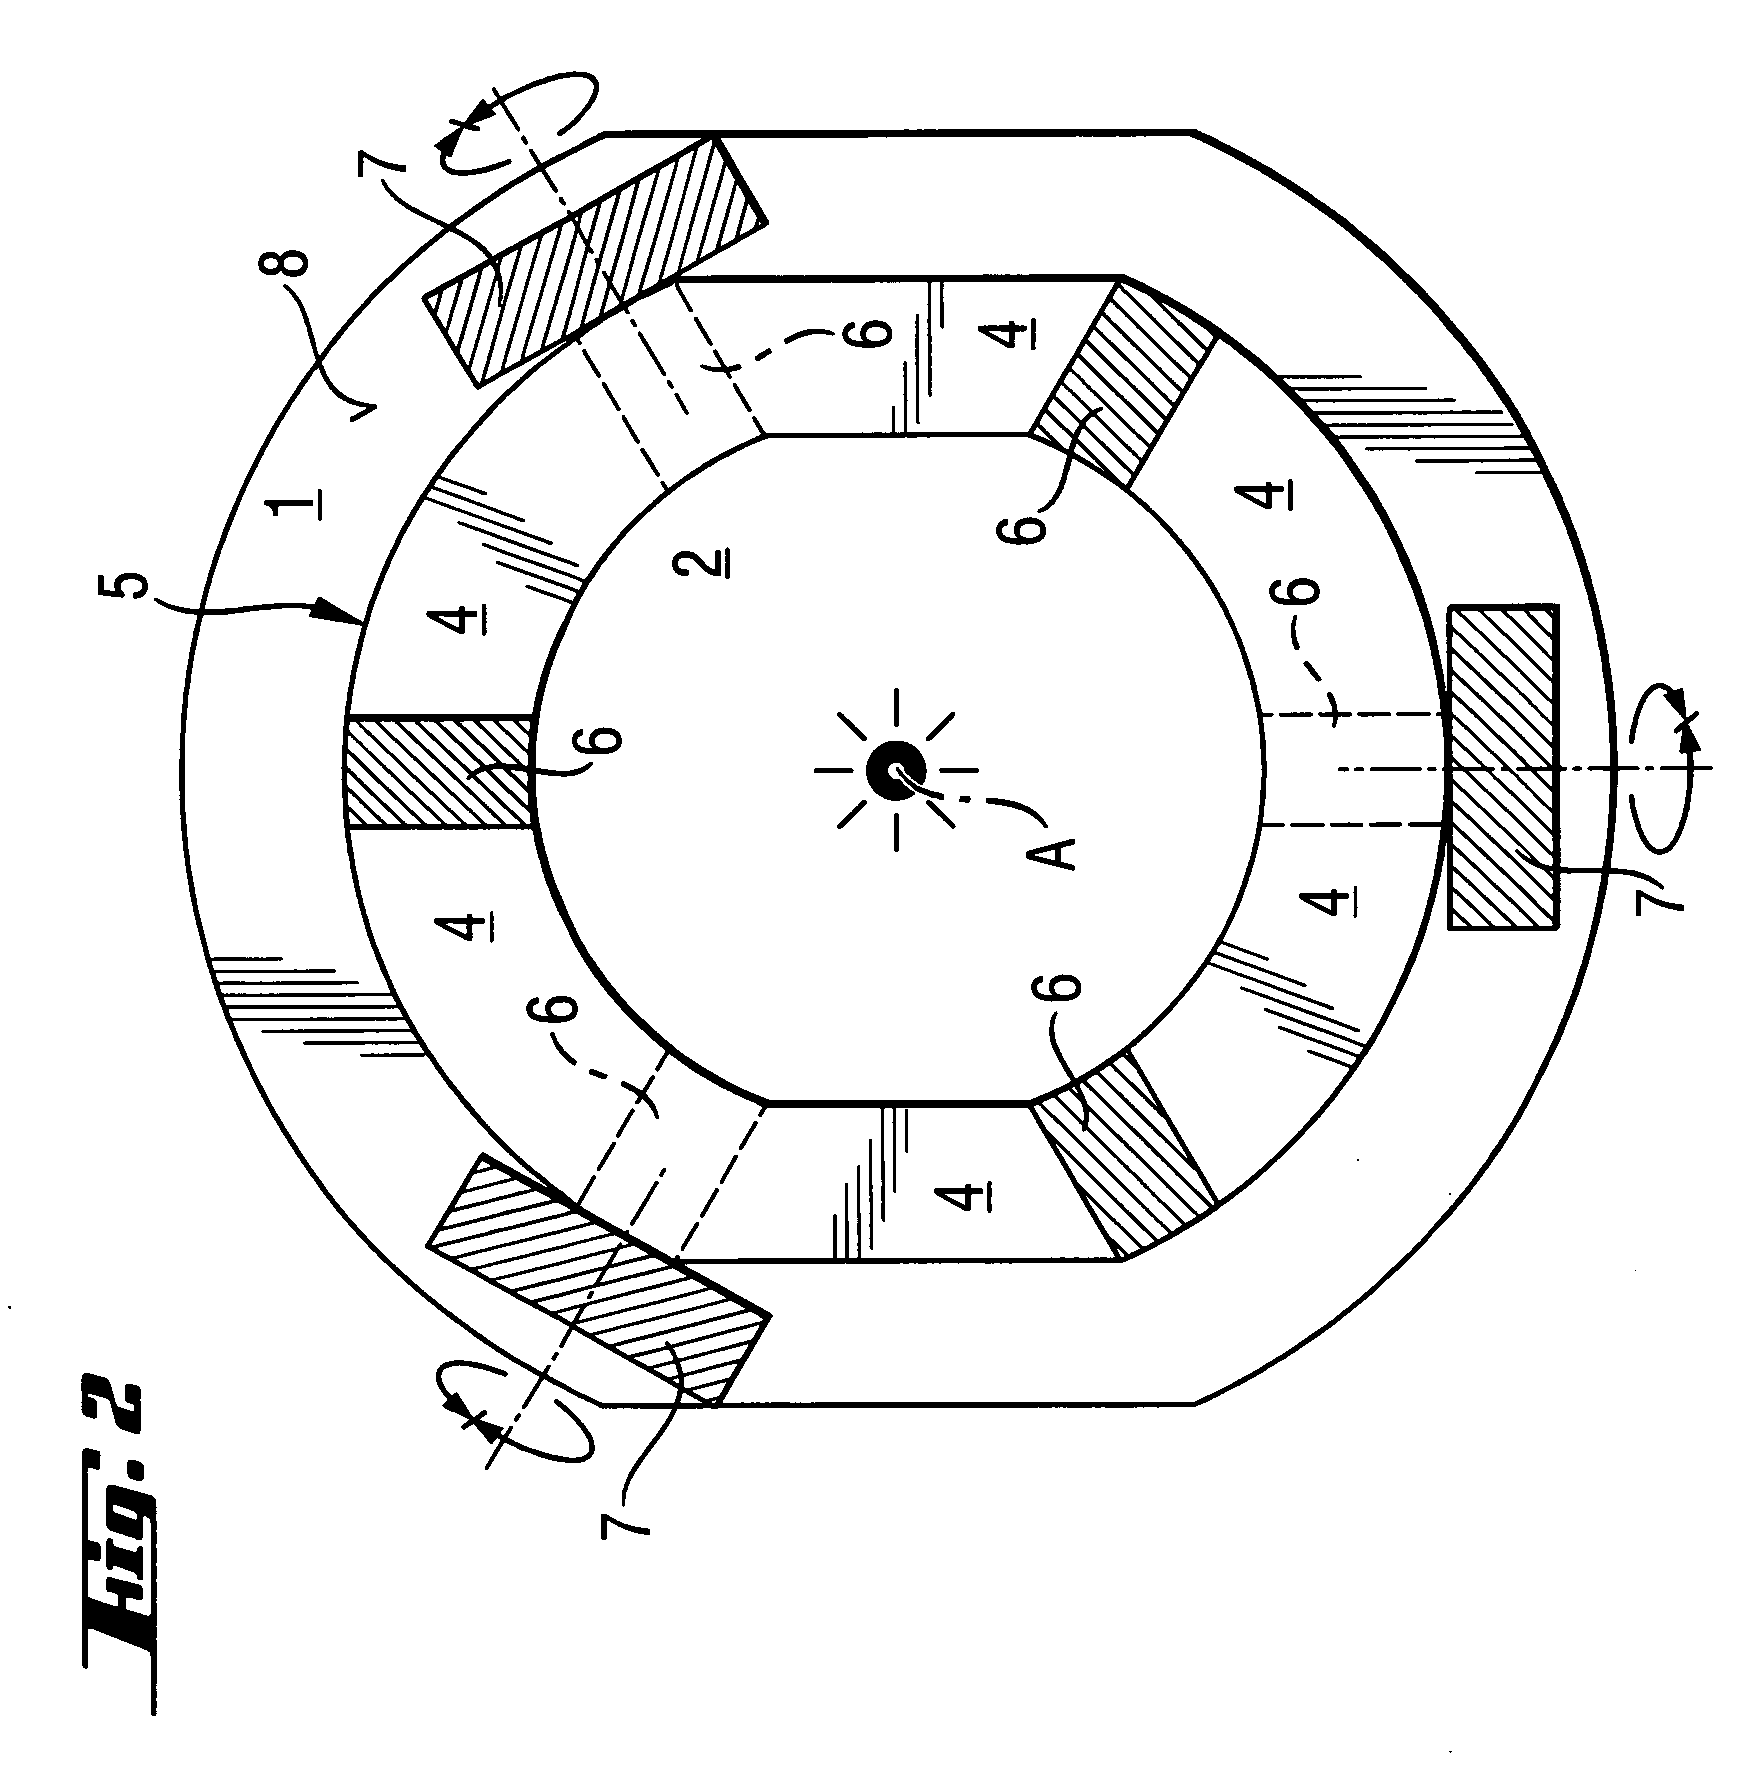 Adjustable optical assembly